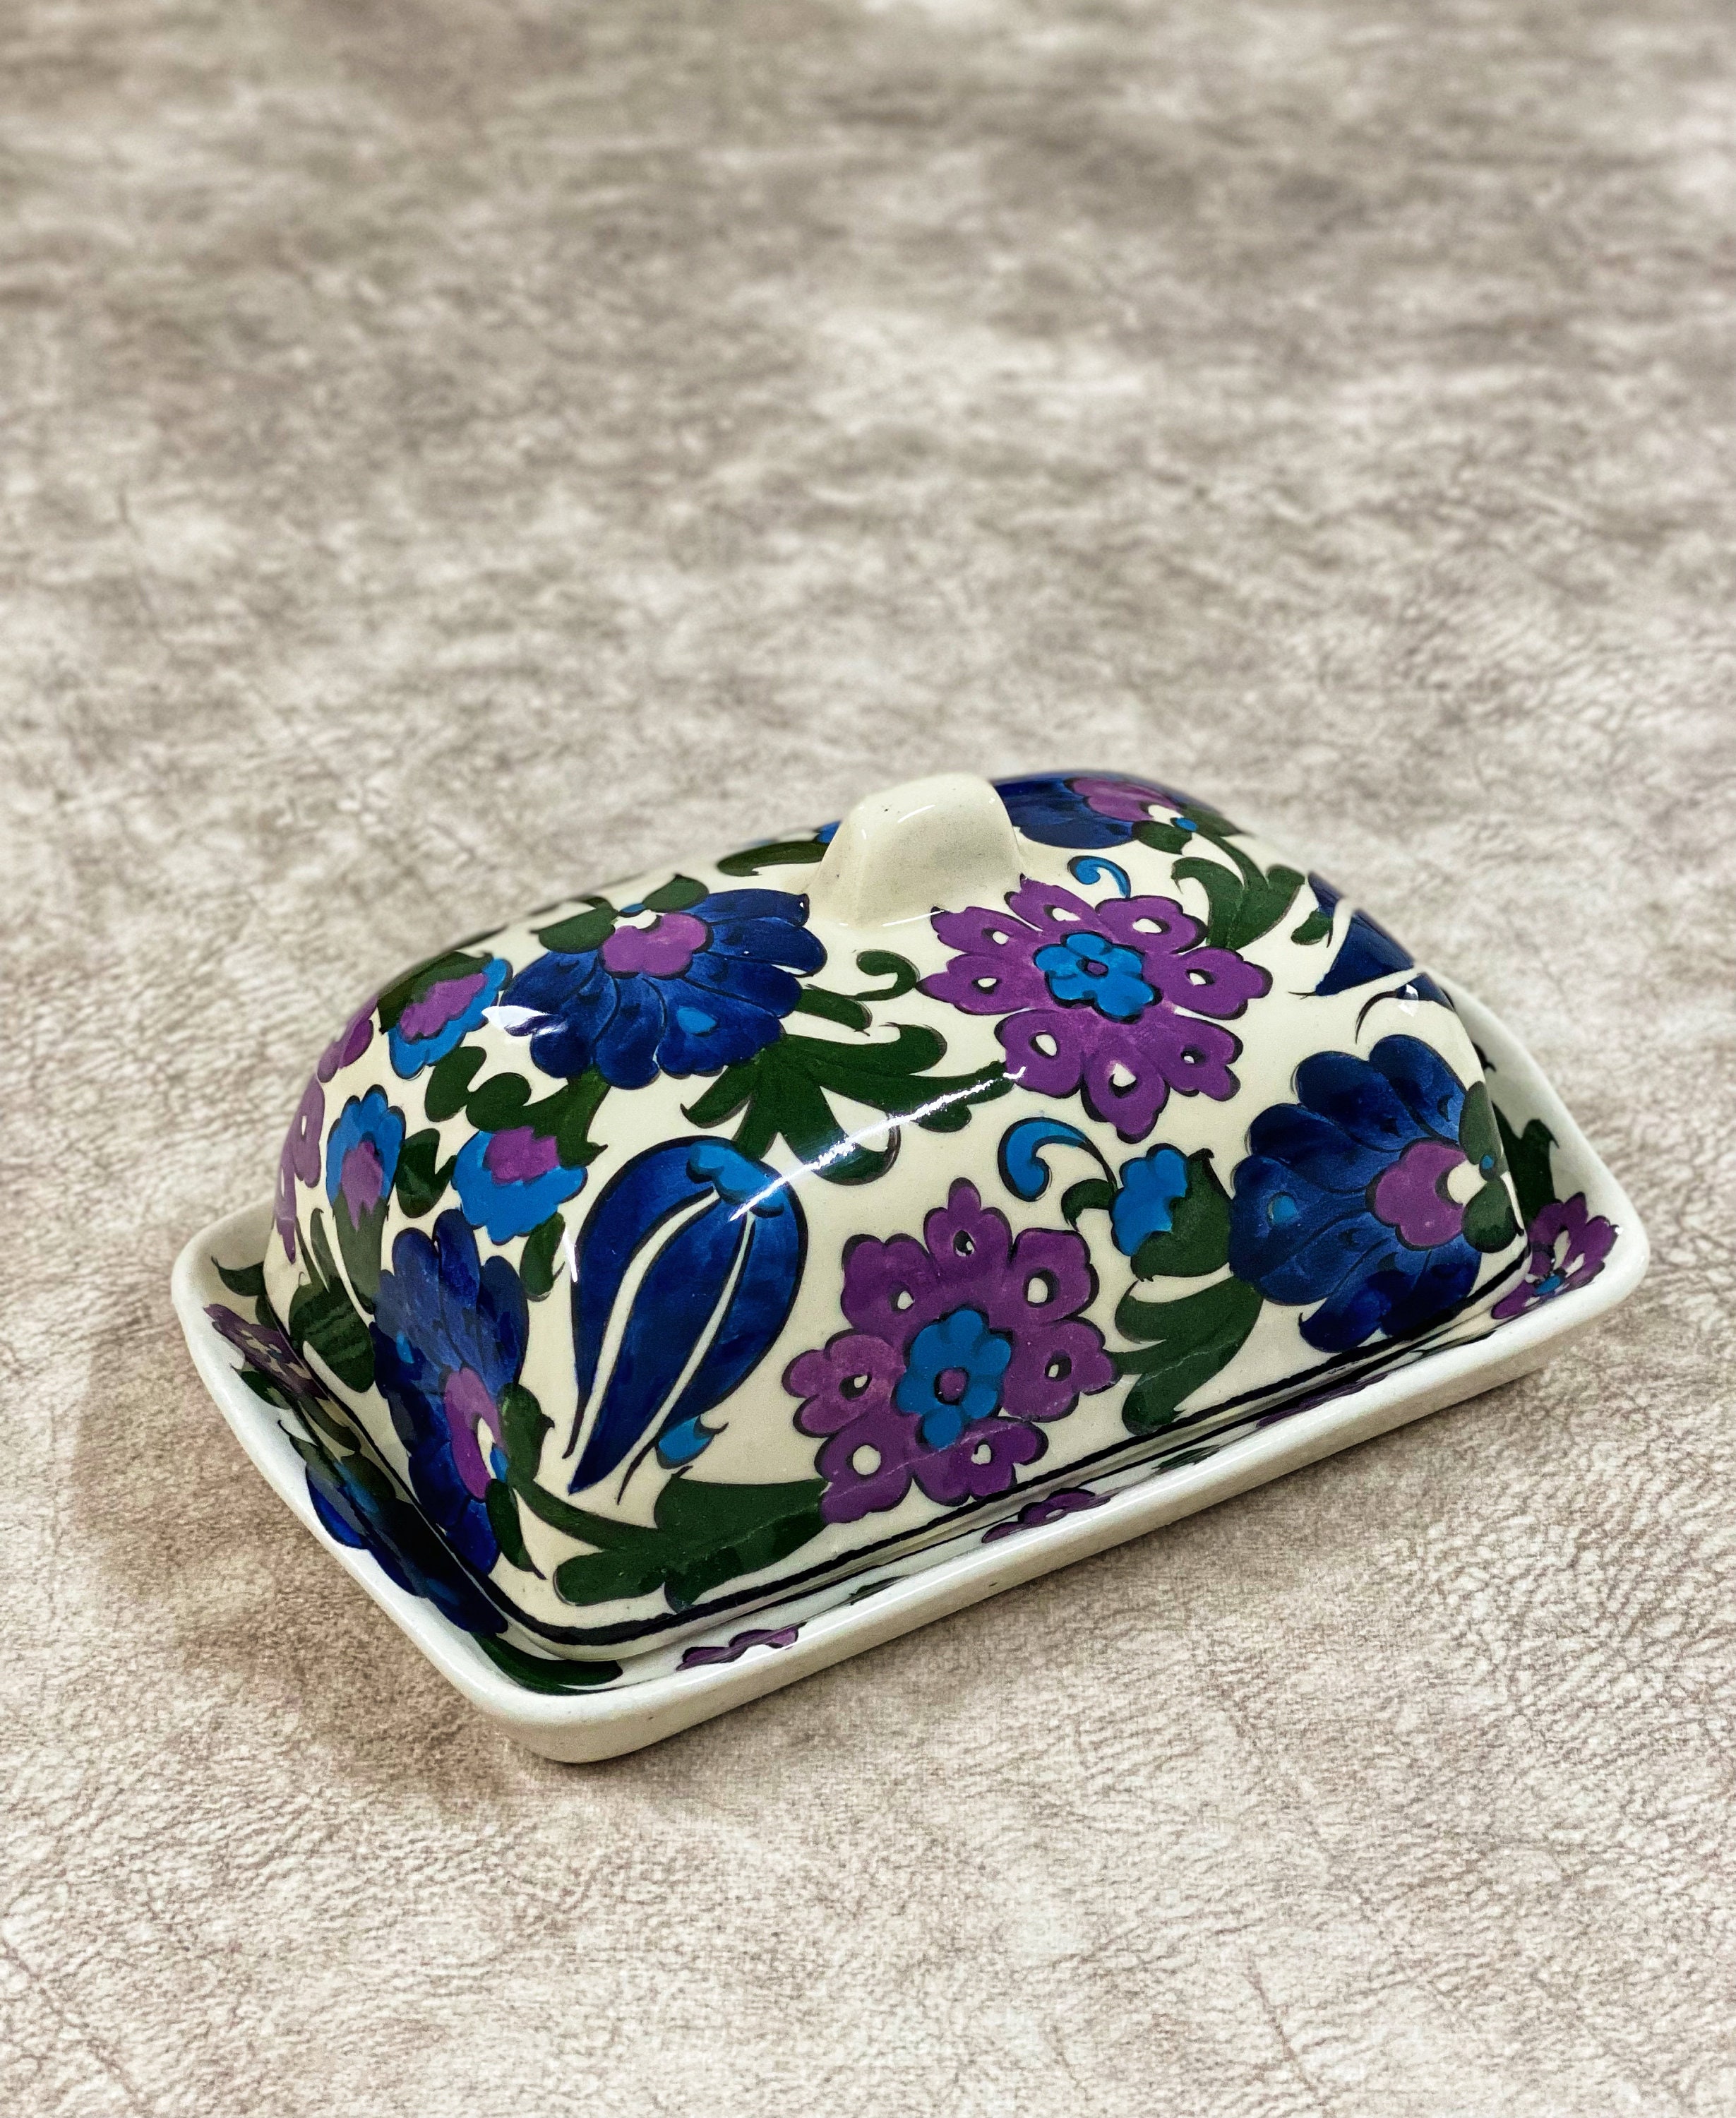 Zulay Kitchen Butter Dish With Lid For Countertop - Porcelain White,  Ceramic Butter Dish with Knob Handle Great for Cooking - Elegant Design  Butter